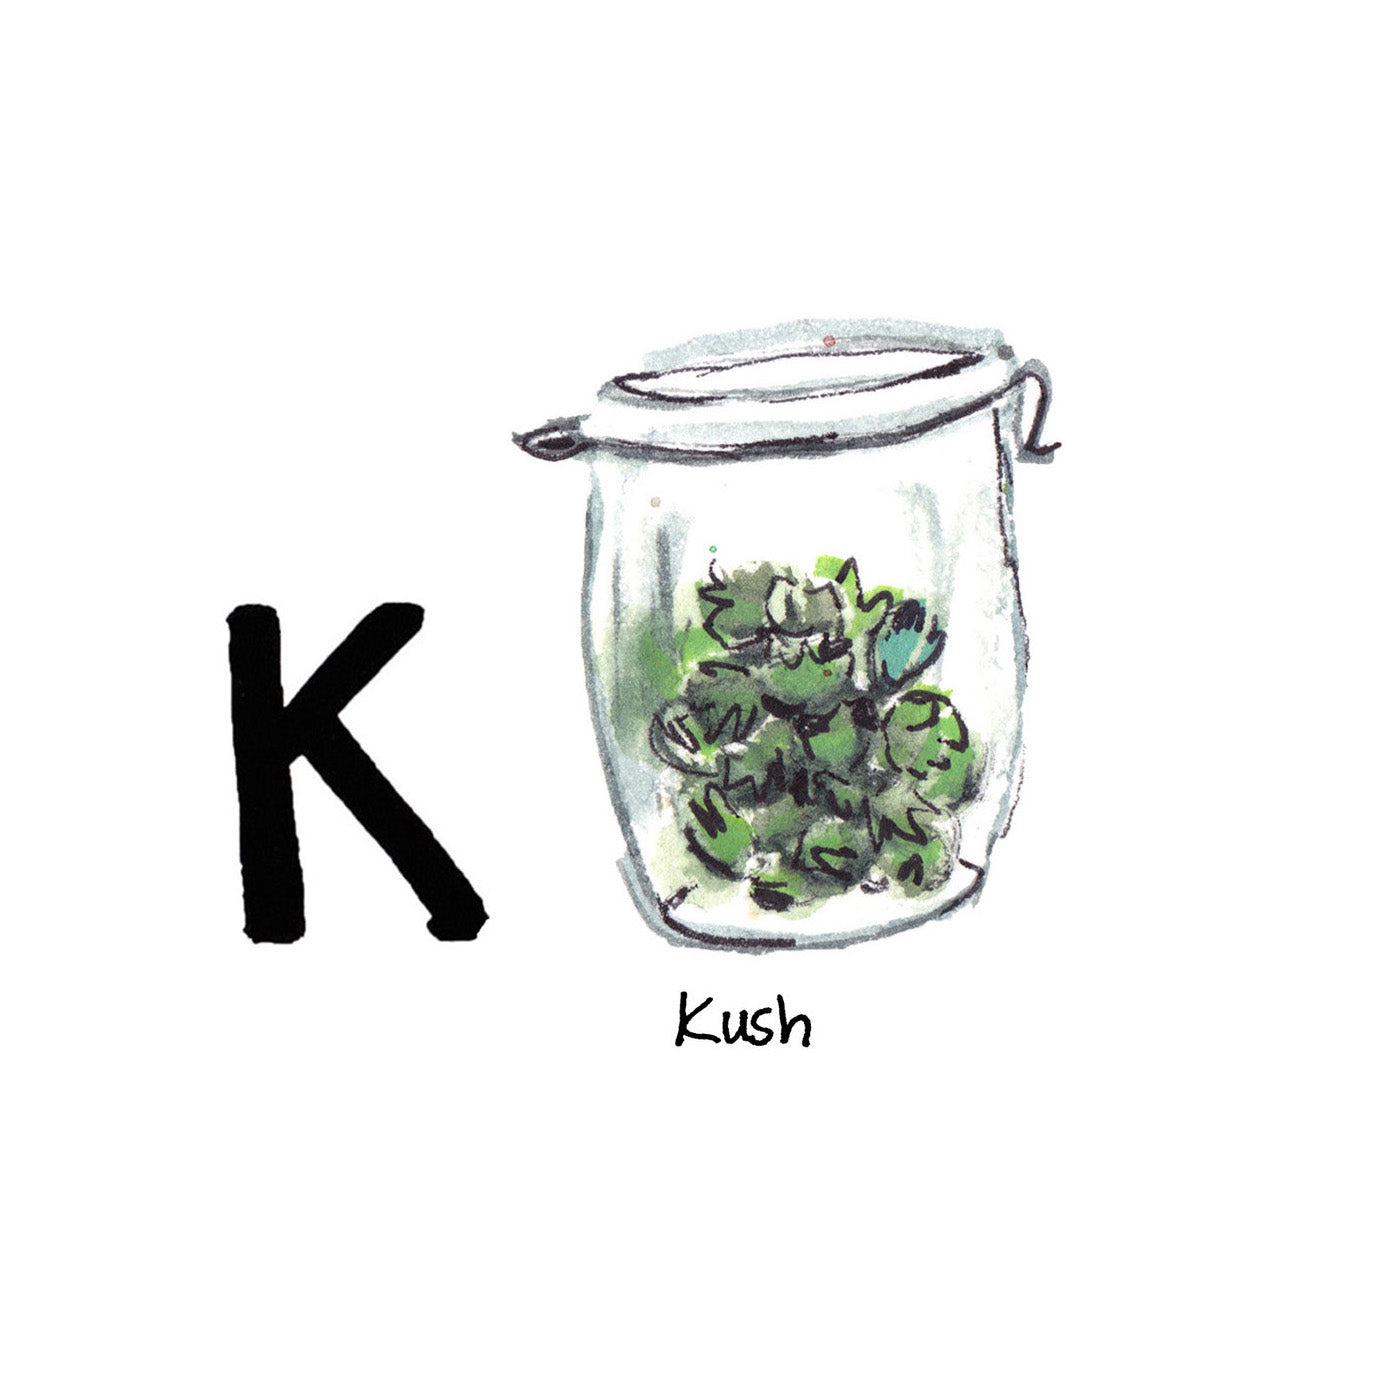 K is for Kush. Kush is a variety of cannabis. It has been legal in the state of California since November 2016, making it the largest and most robust cannabis market in the country.